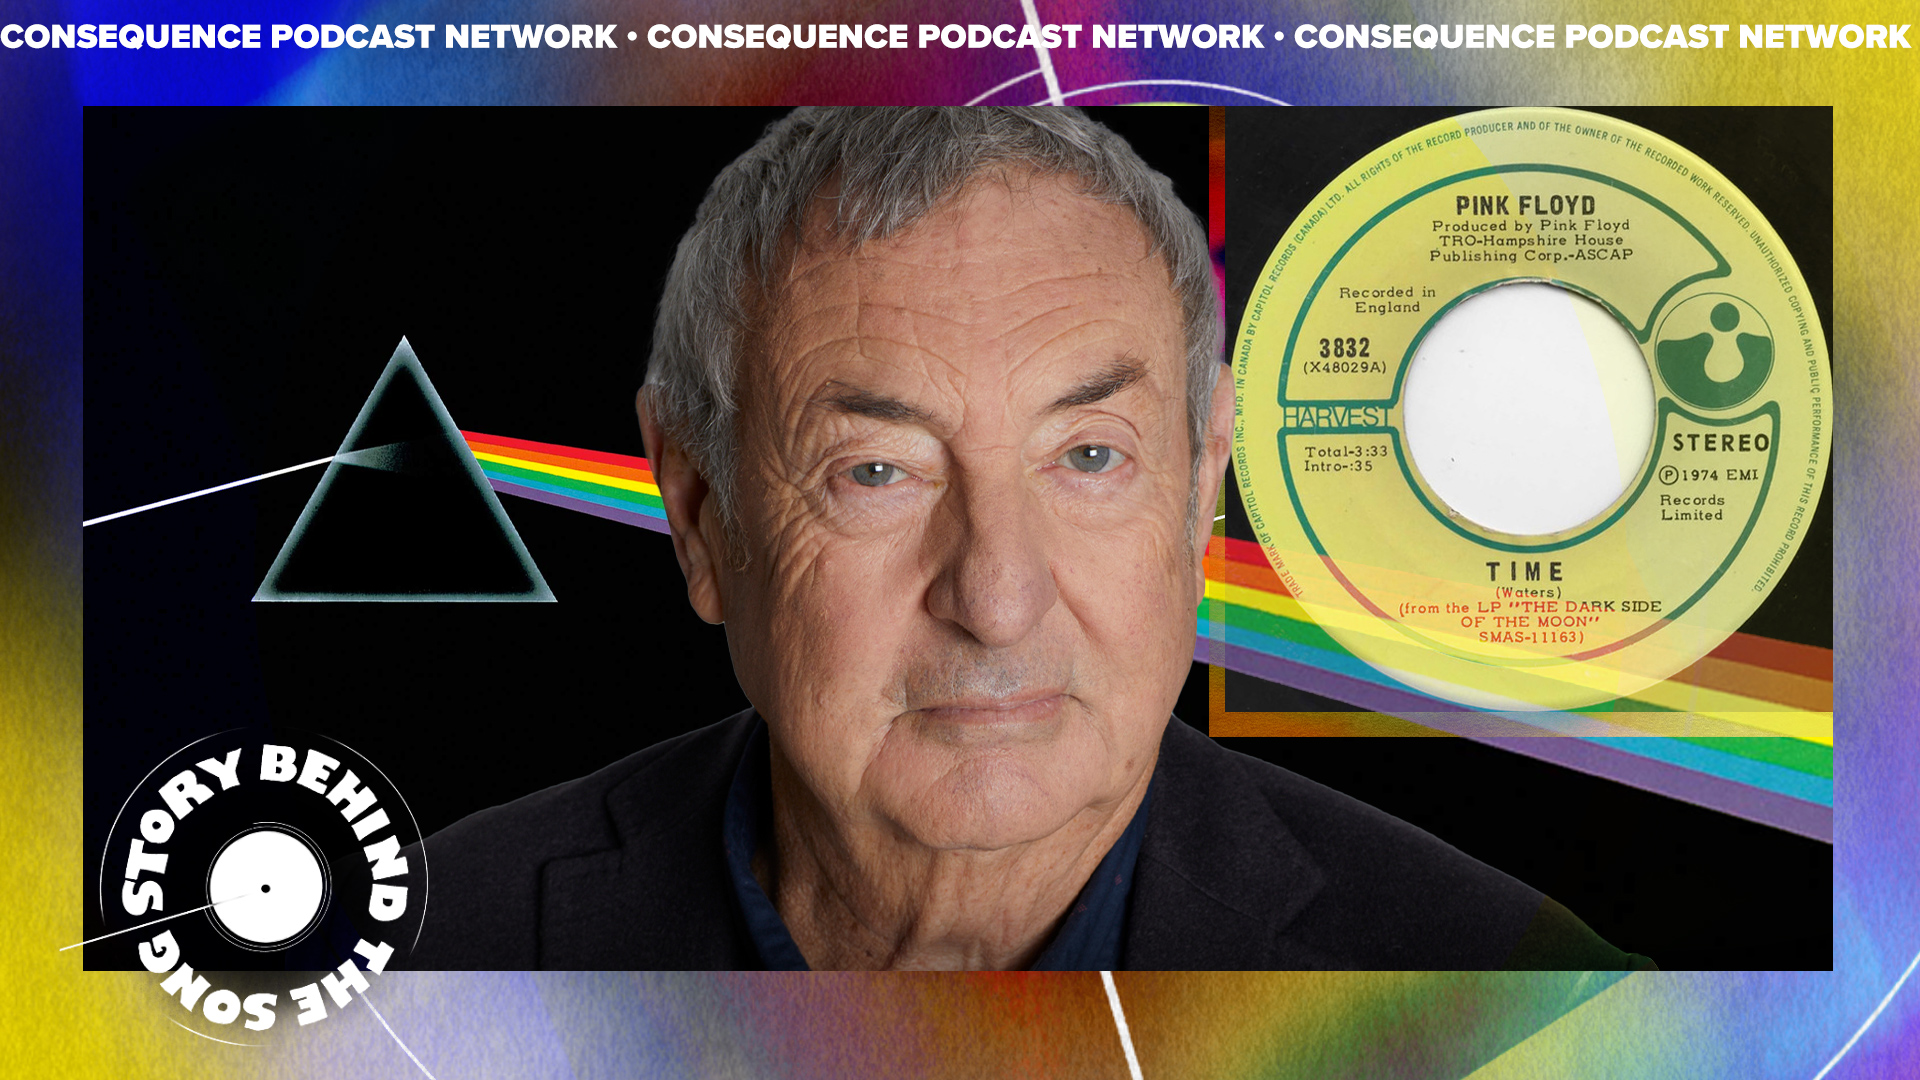 The Story Behind Pink Floyd's "Time" as Told by Drummer Nick Mason